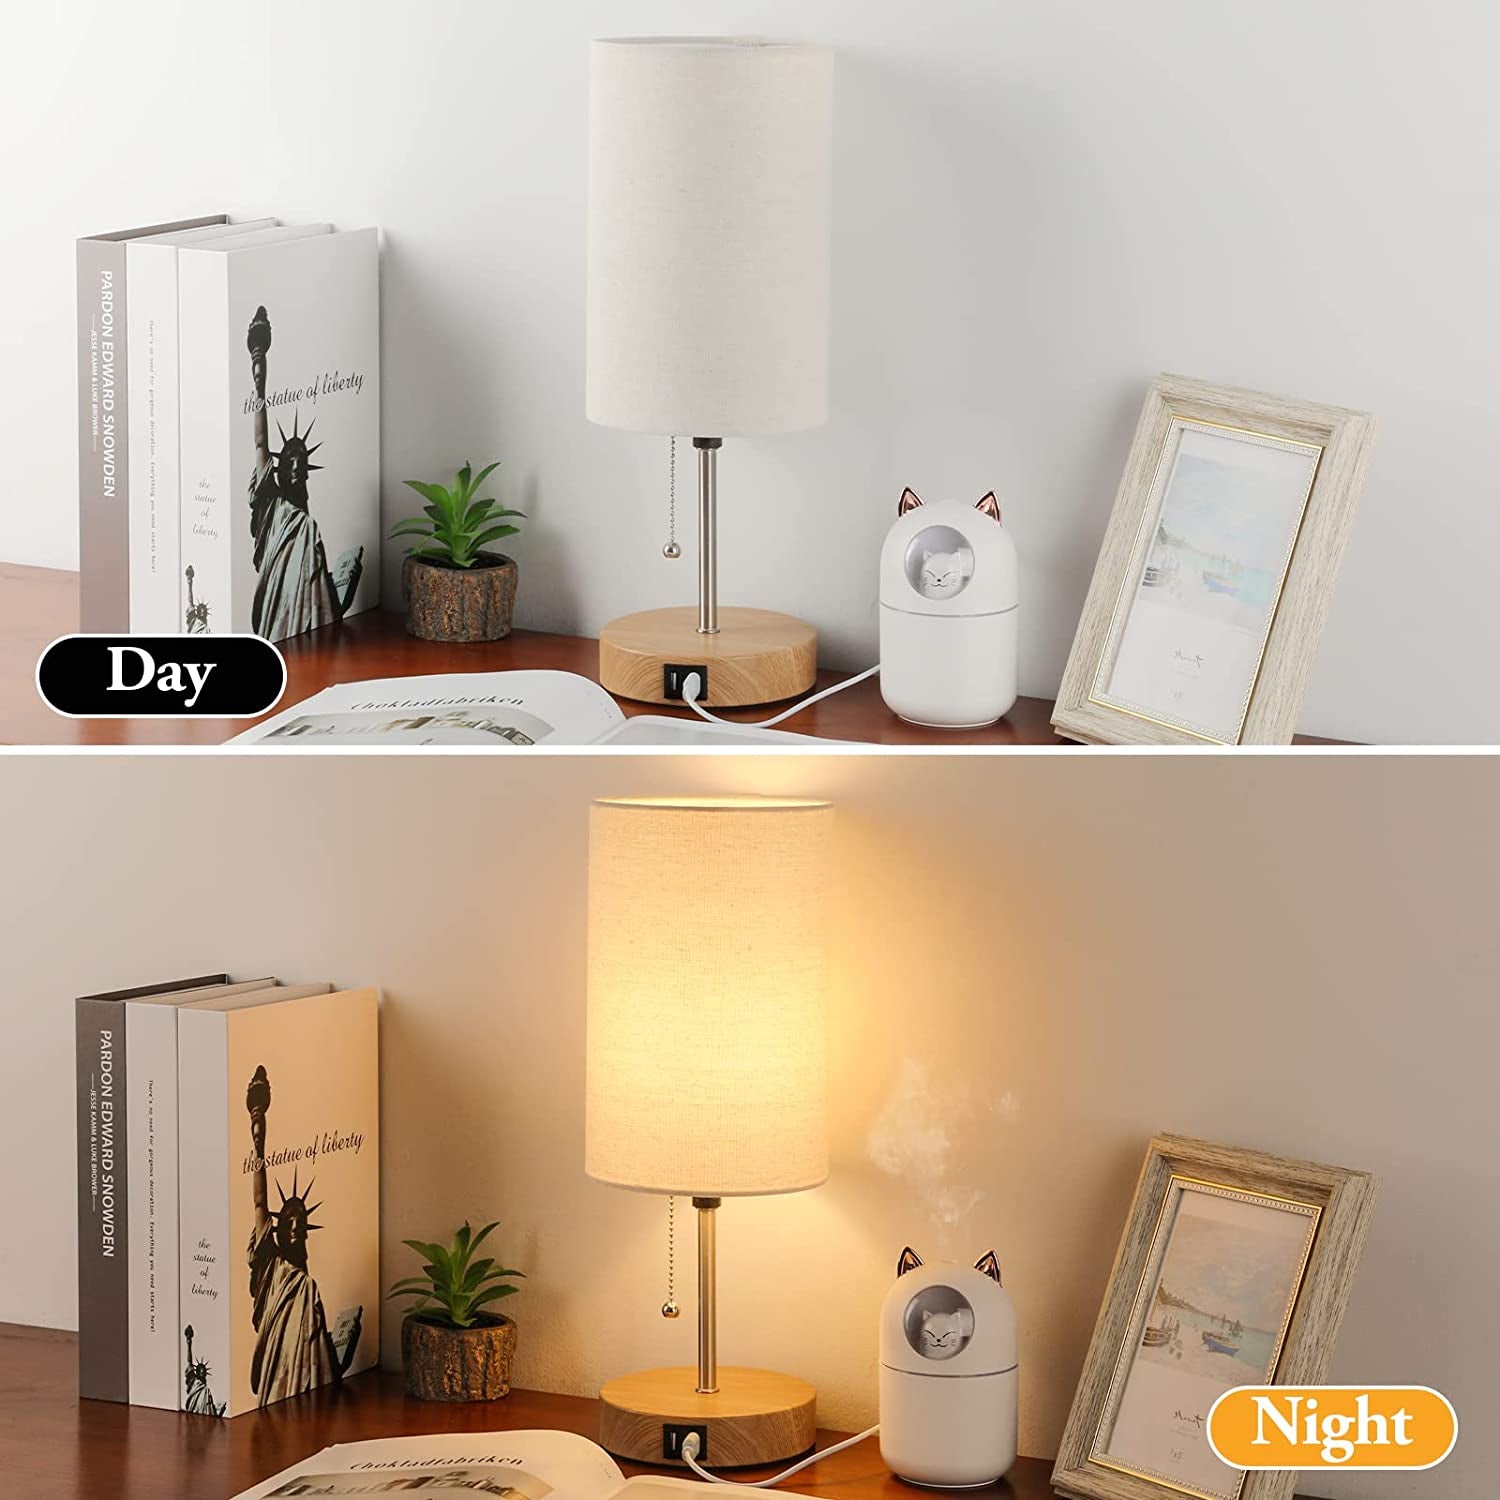 Set of 2 Table Lamps with 2 USB Ports, Modern Lamps with Pull Chain